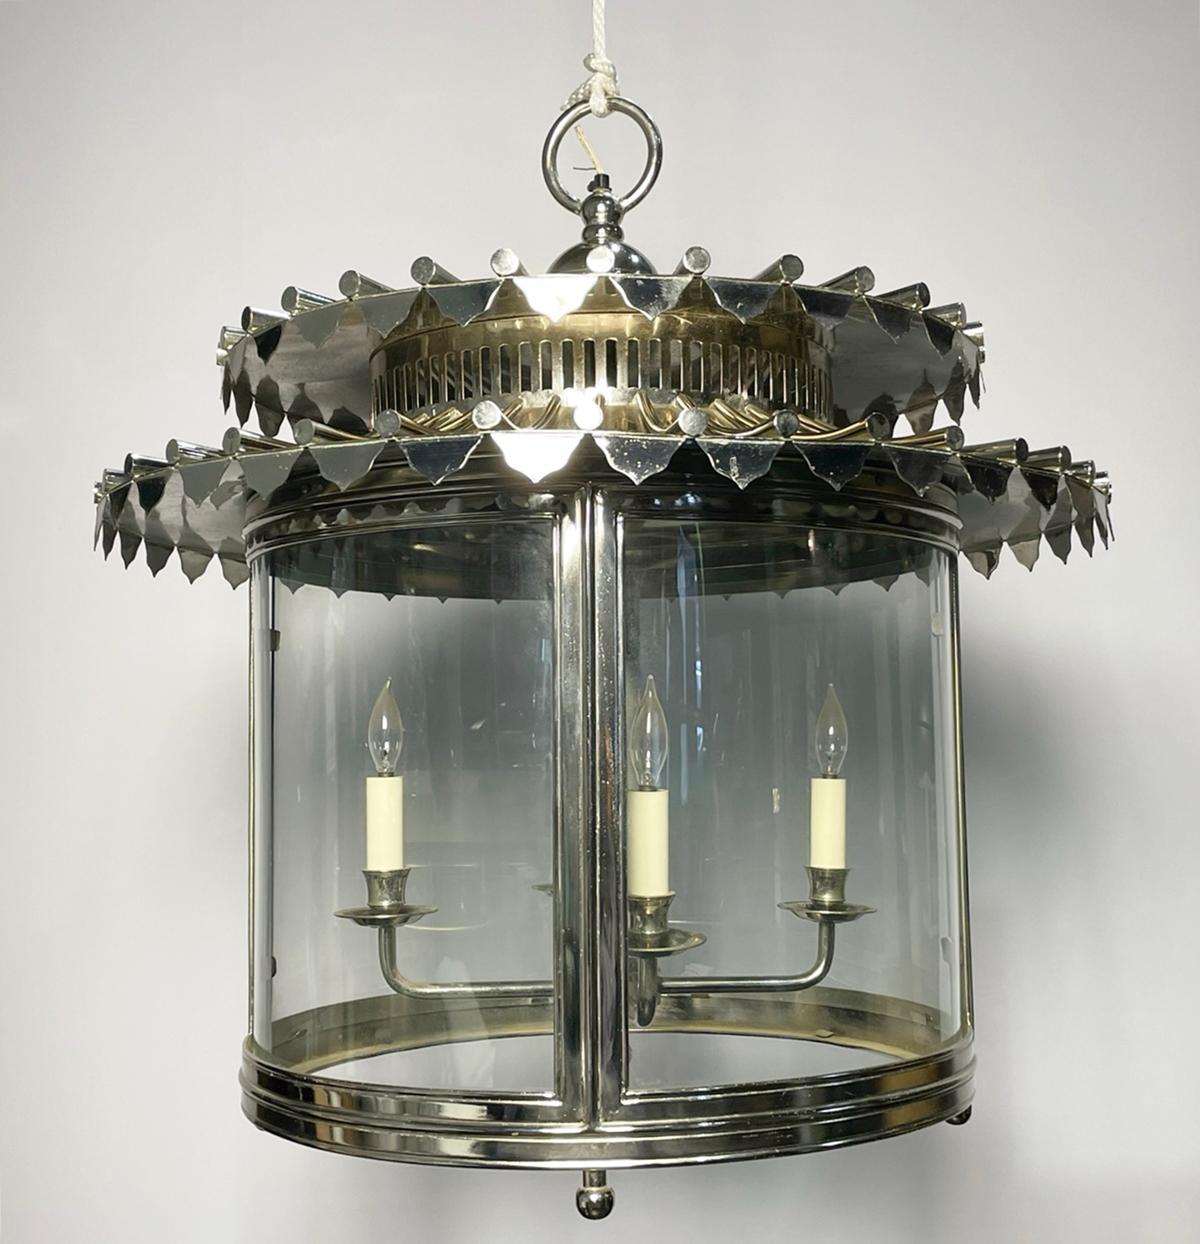 Introducing the exquisite Nickel & Glass Chandelier, crafted in England by the renowned designer Charles Edwards.

 This stunning light fixture boasts a sophisticated and elegant design, featuring four candles suspended from the top.
 The